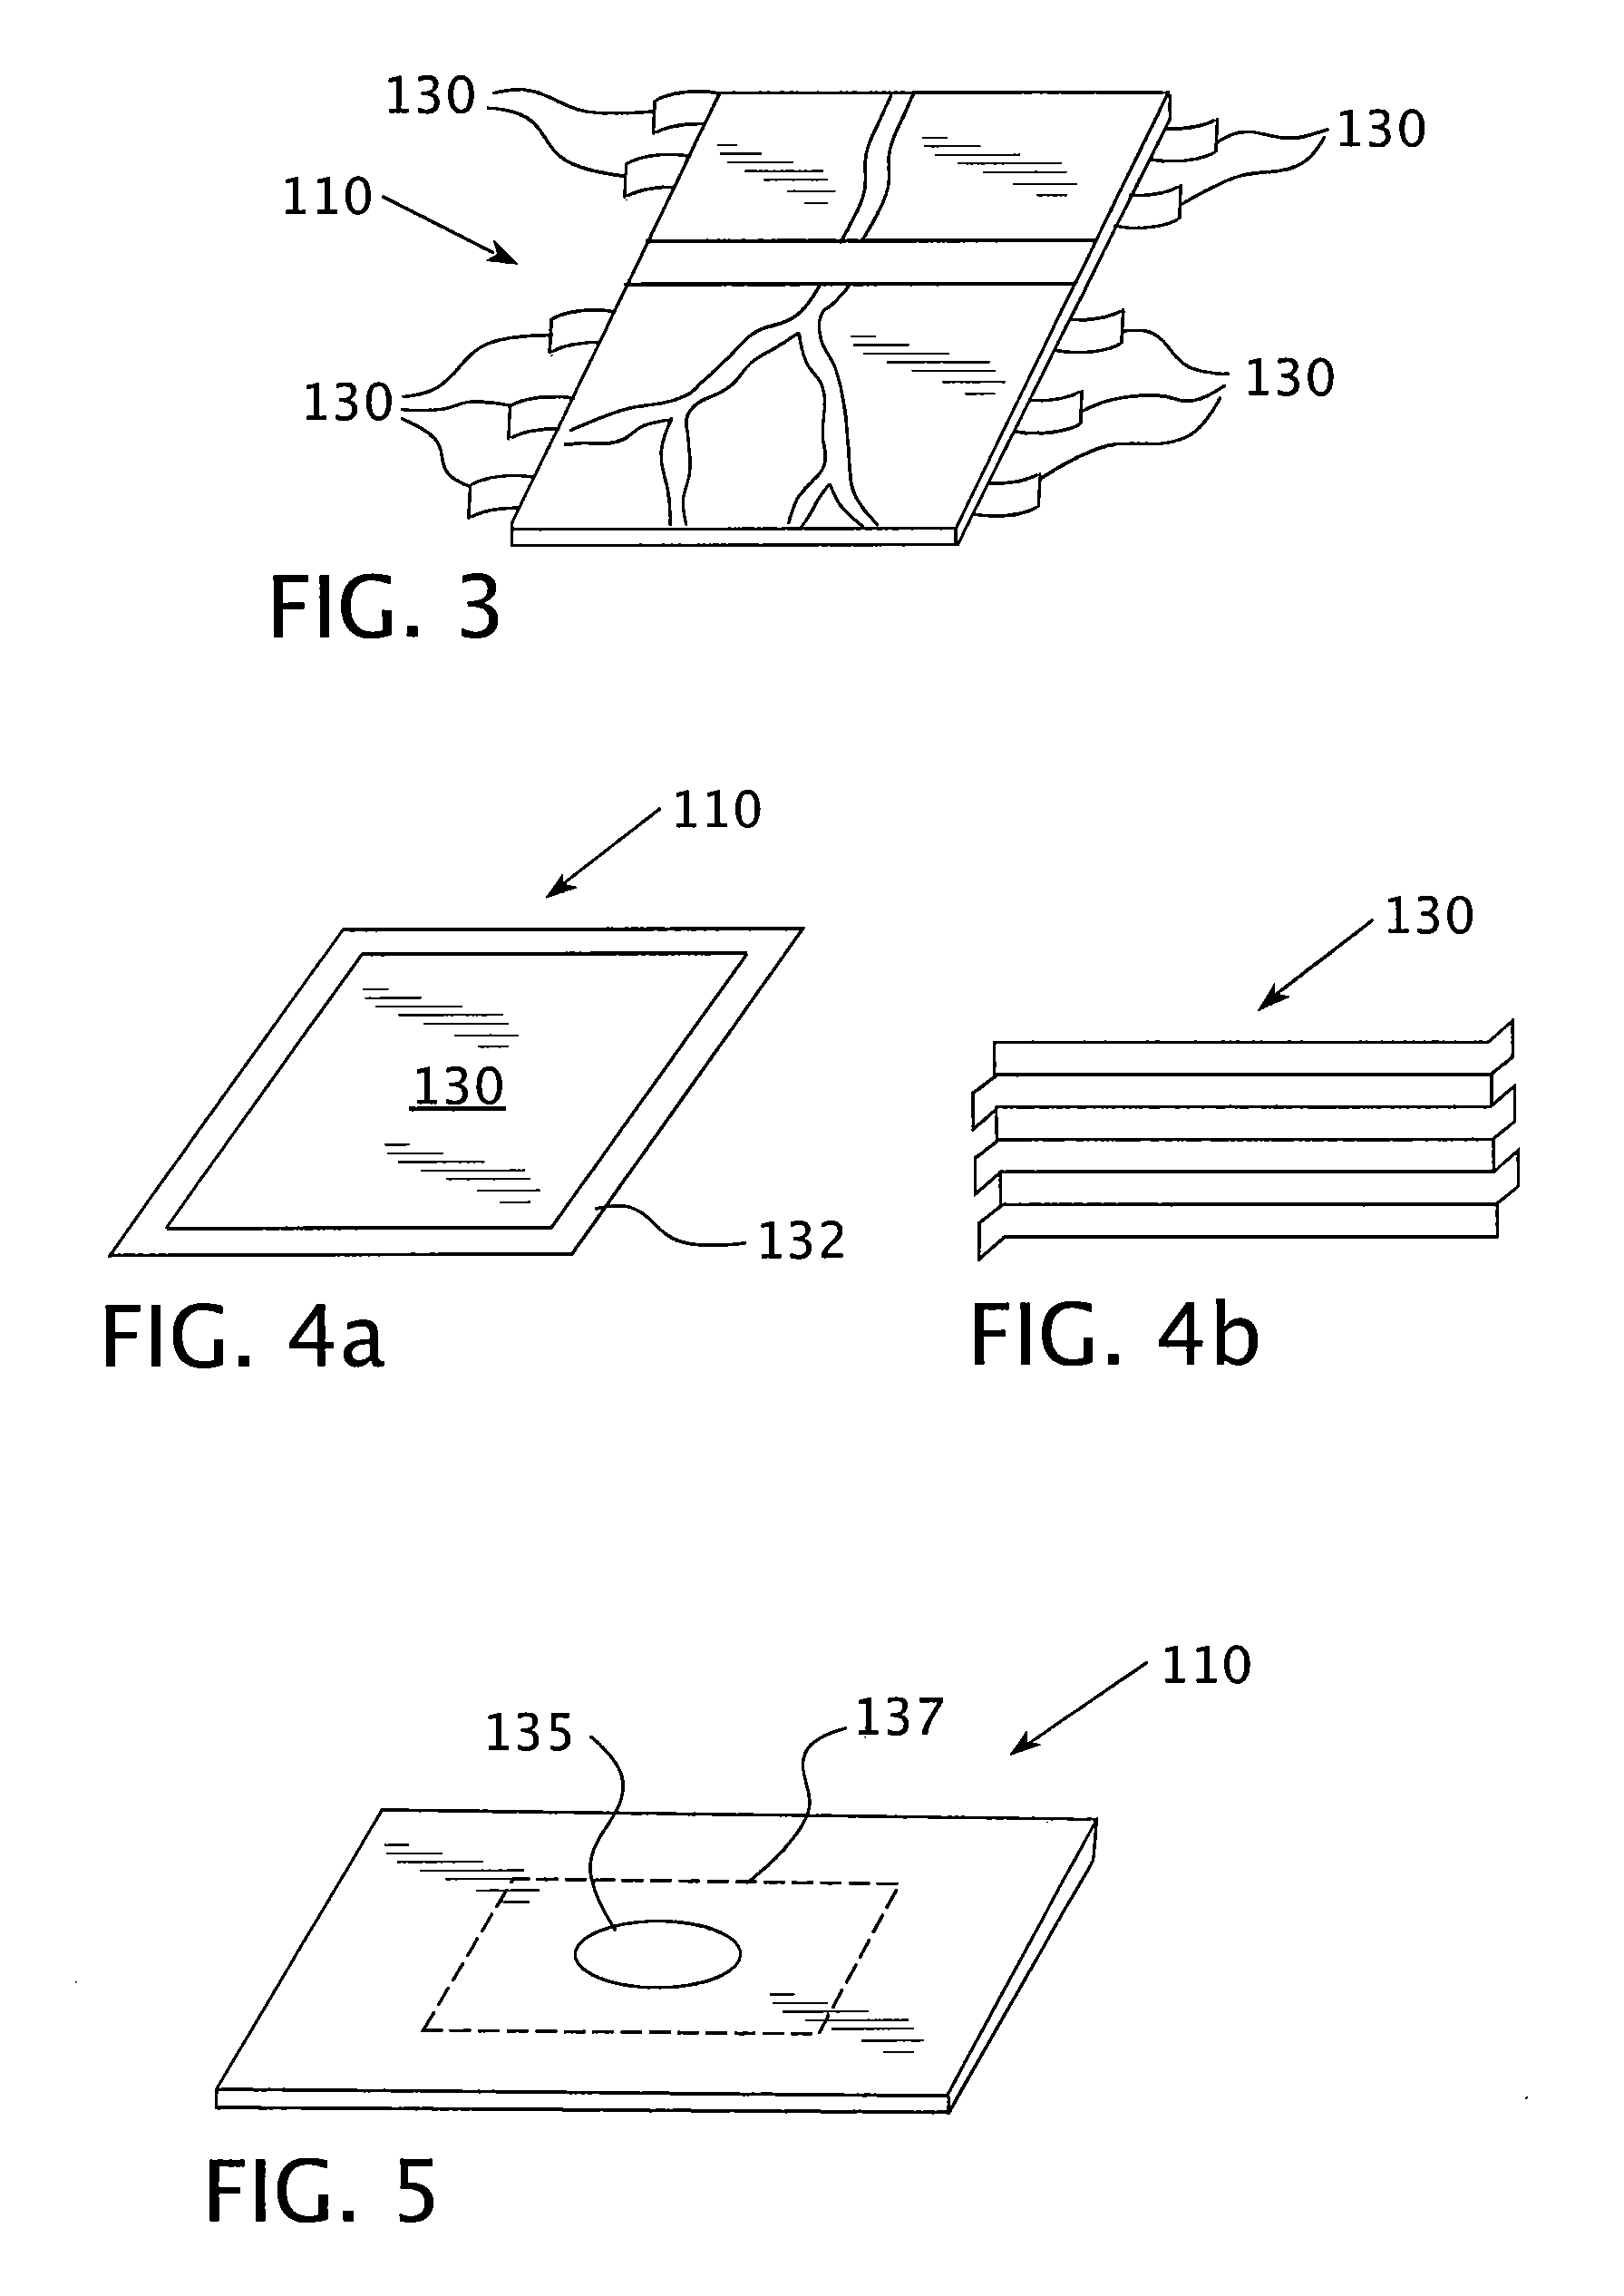 Thermochromic devices for vascular access procedures